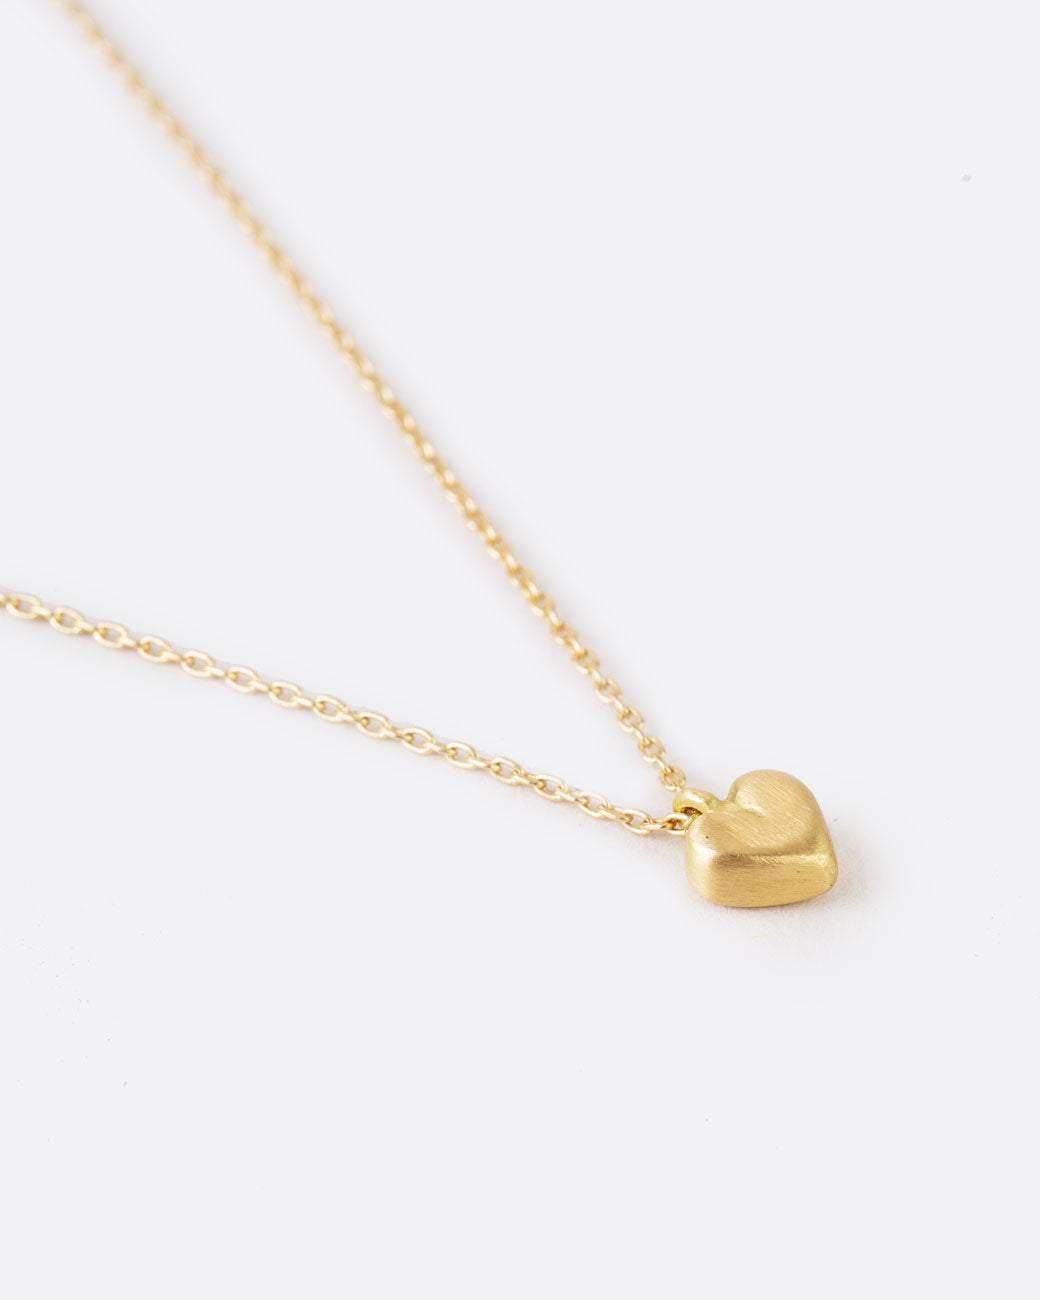 simple gold heart pendant on a thin yellow gold chain